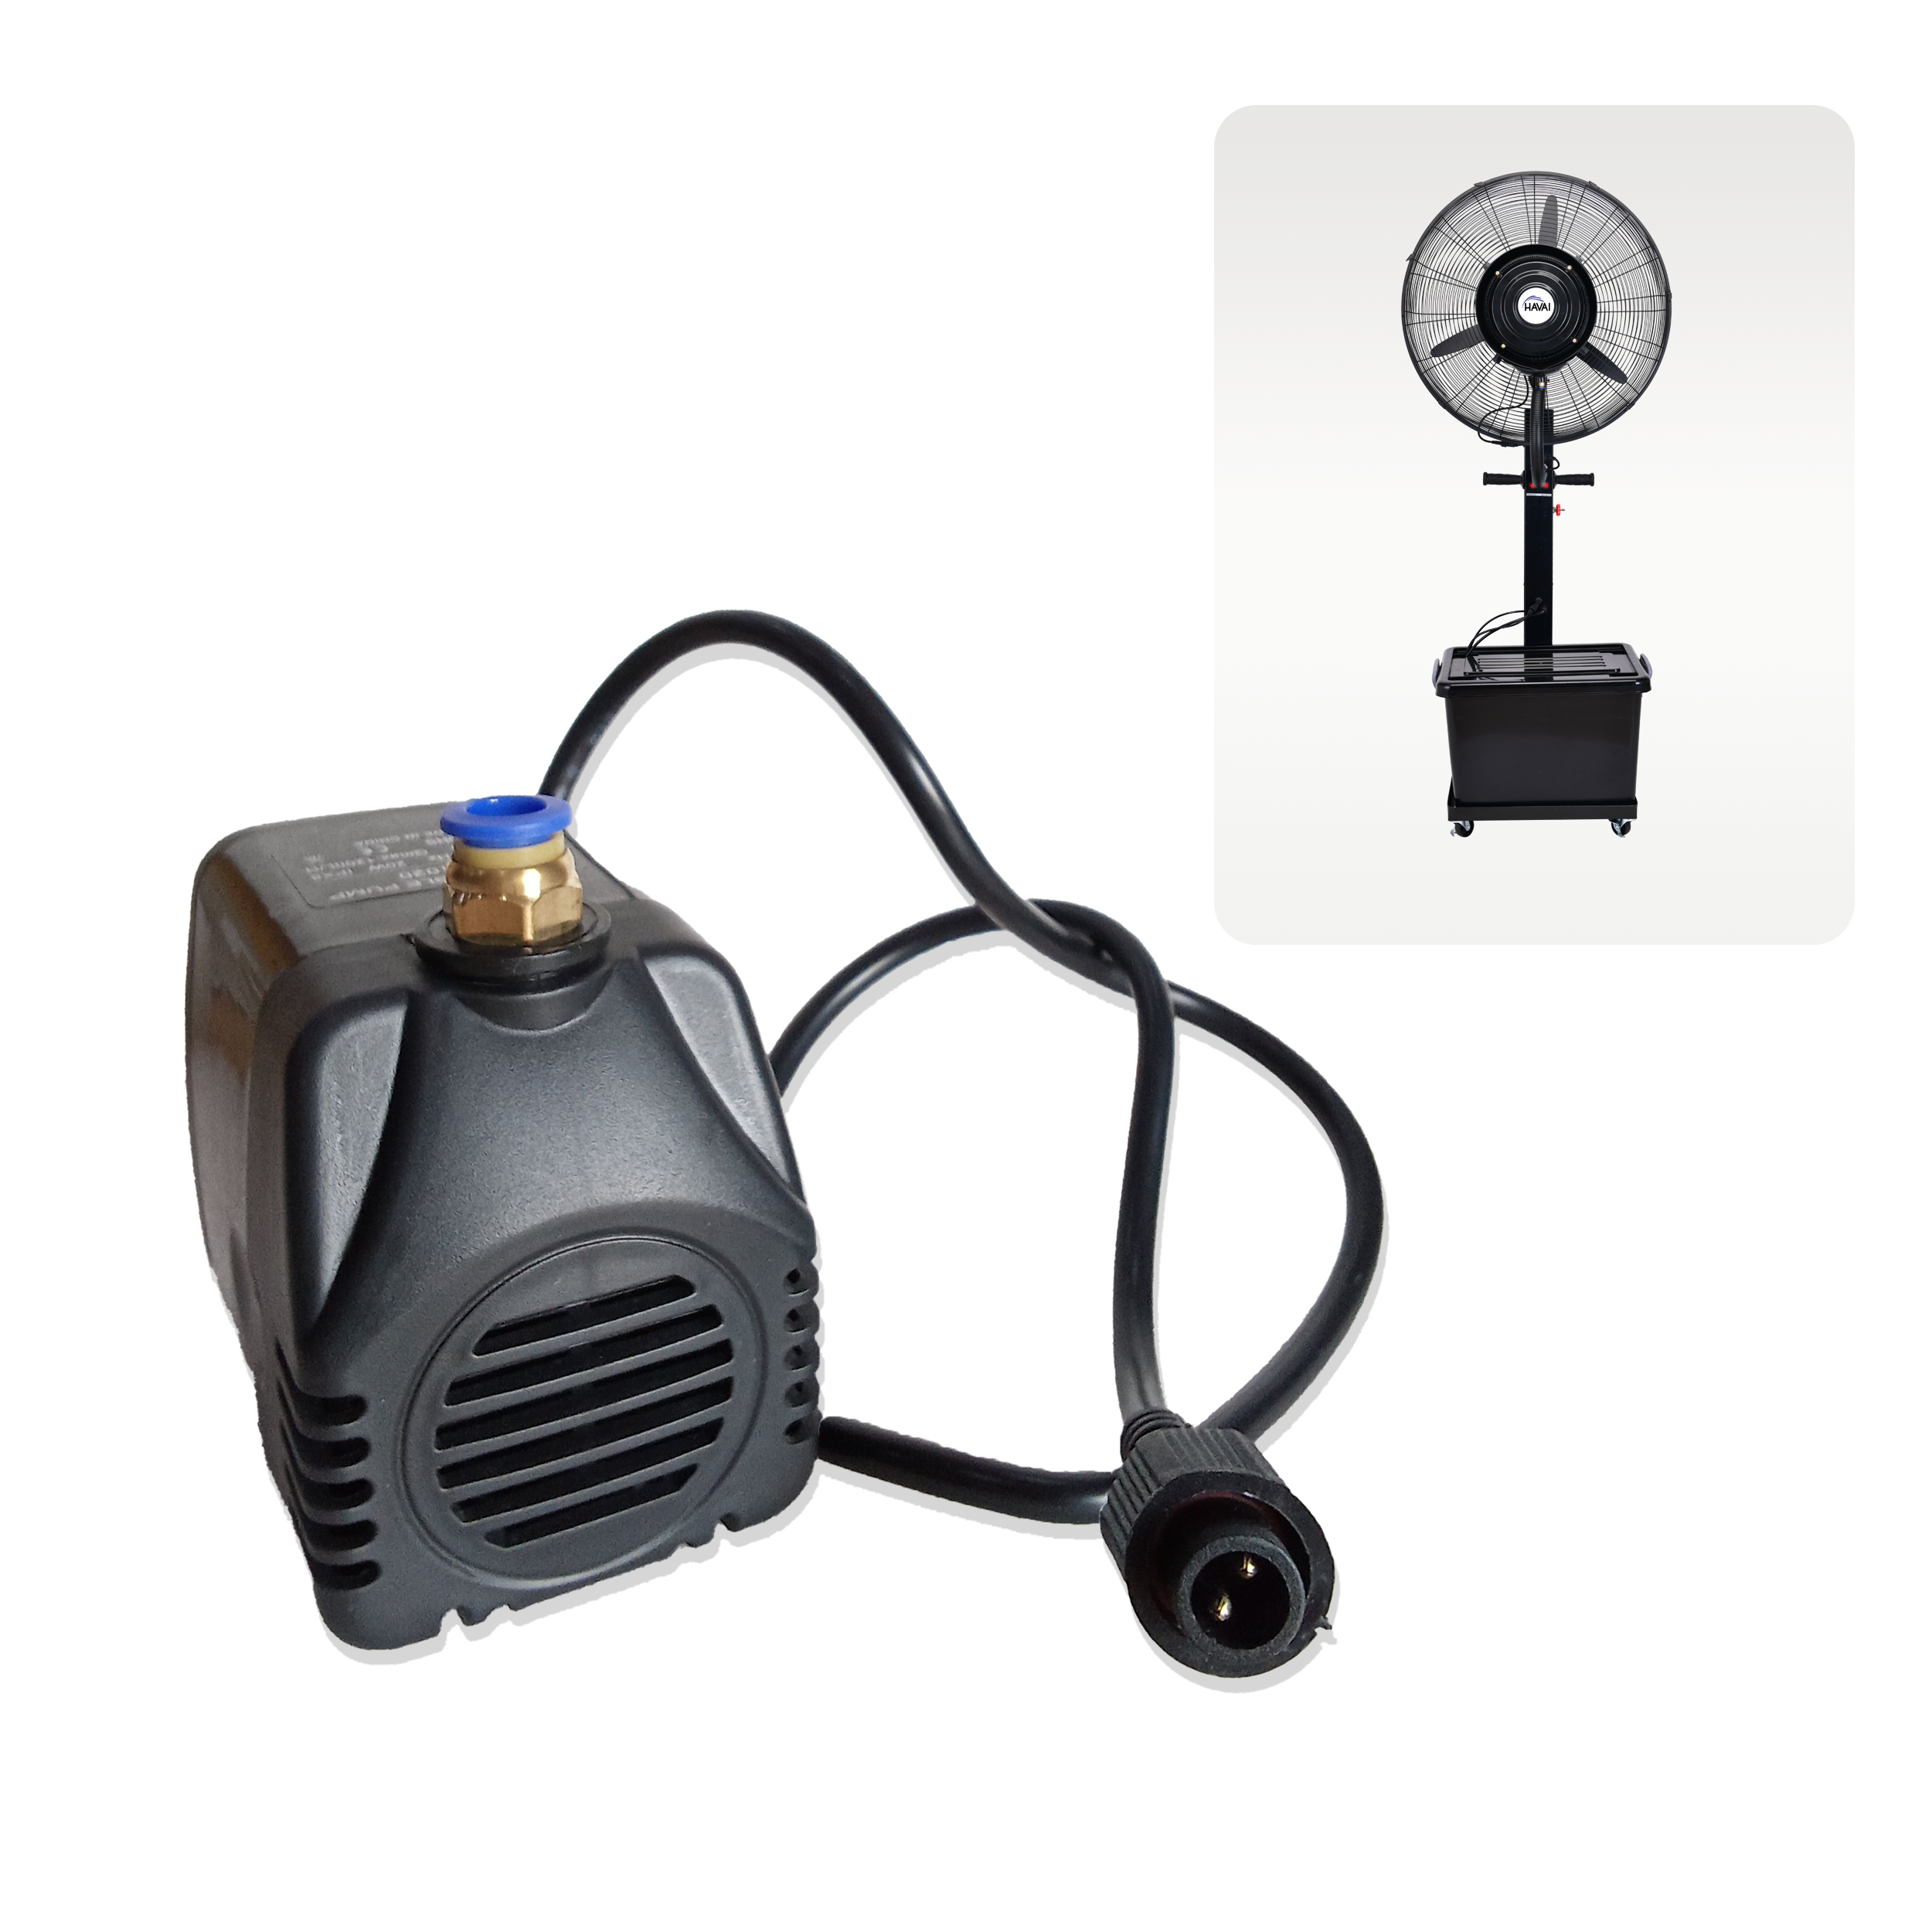 Submersible Pump - For Mist Fans - Compatible with all Commercial and Industrial Mist Fans